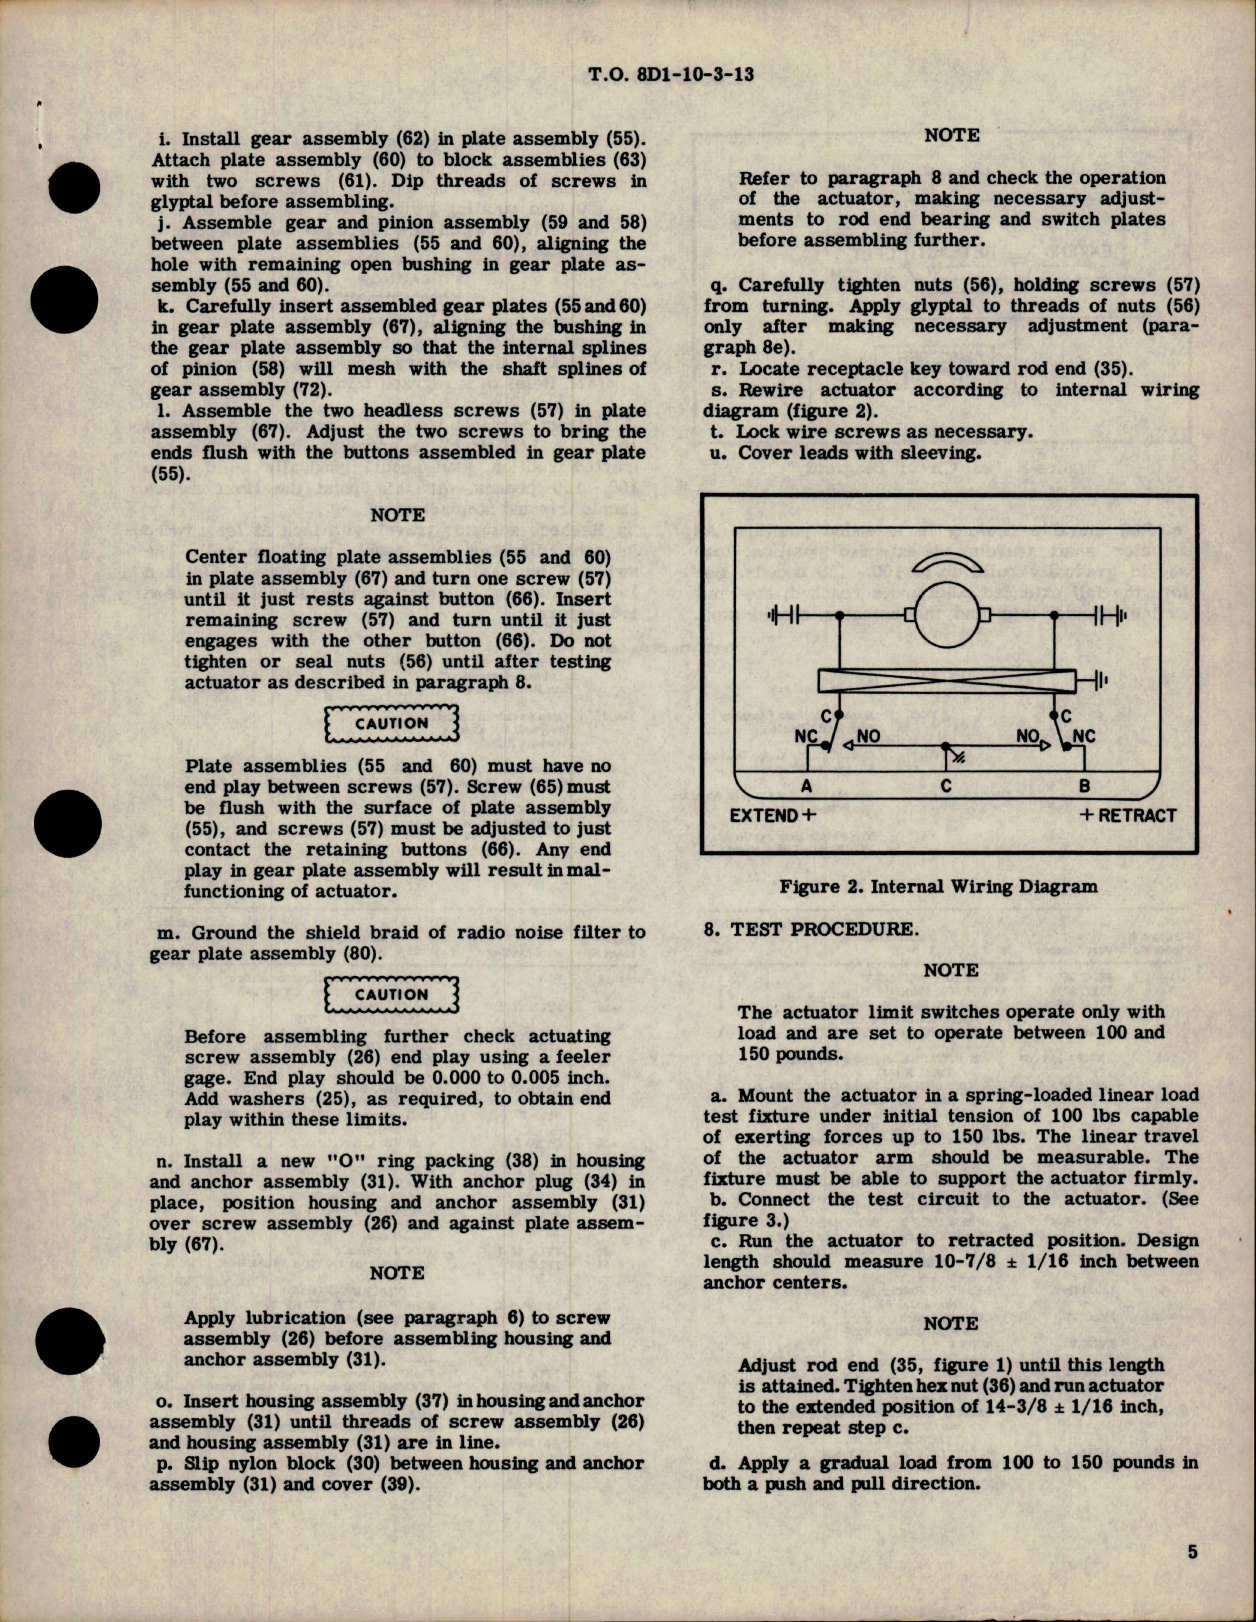 Sample page 5 from AirCorps Library document: Overhaul Instructions with Parts for Linear Electro Mechanical Actuator - Parts JYLC 3670-1 and JYLC 3670-2